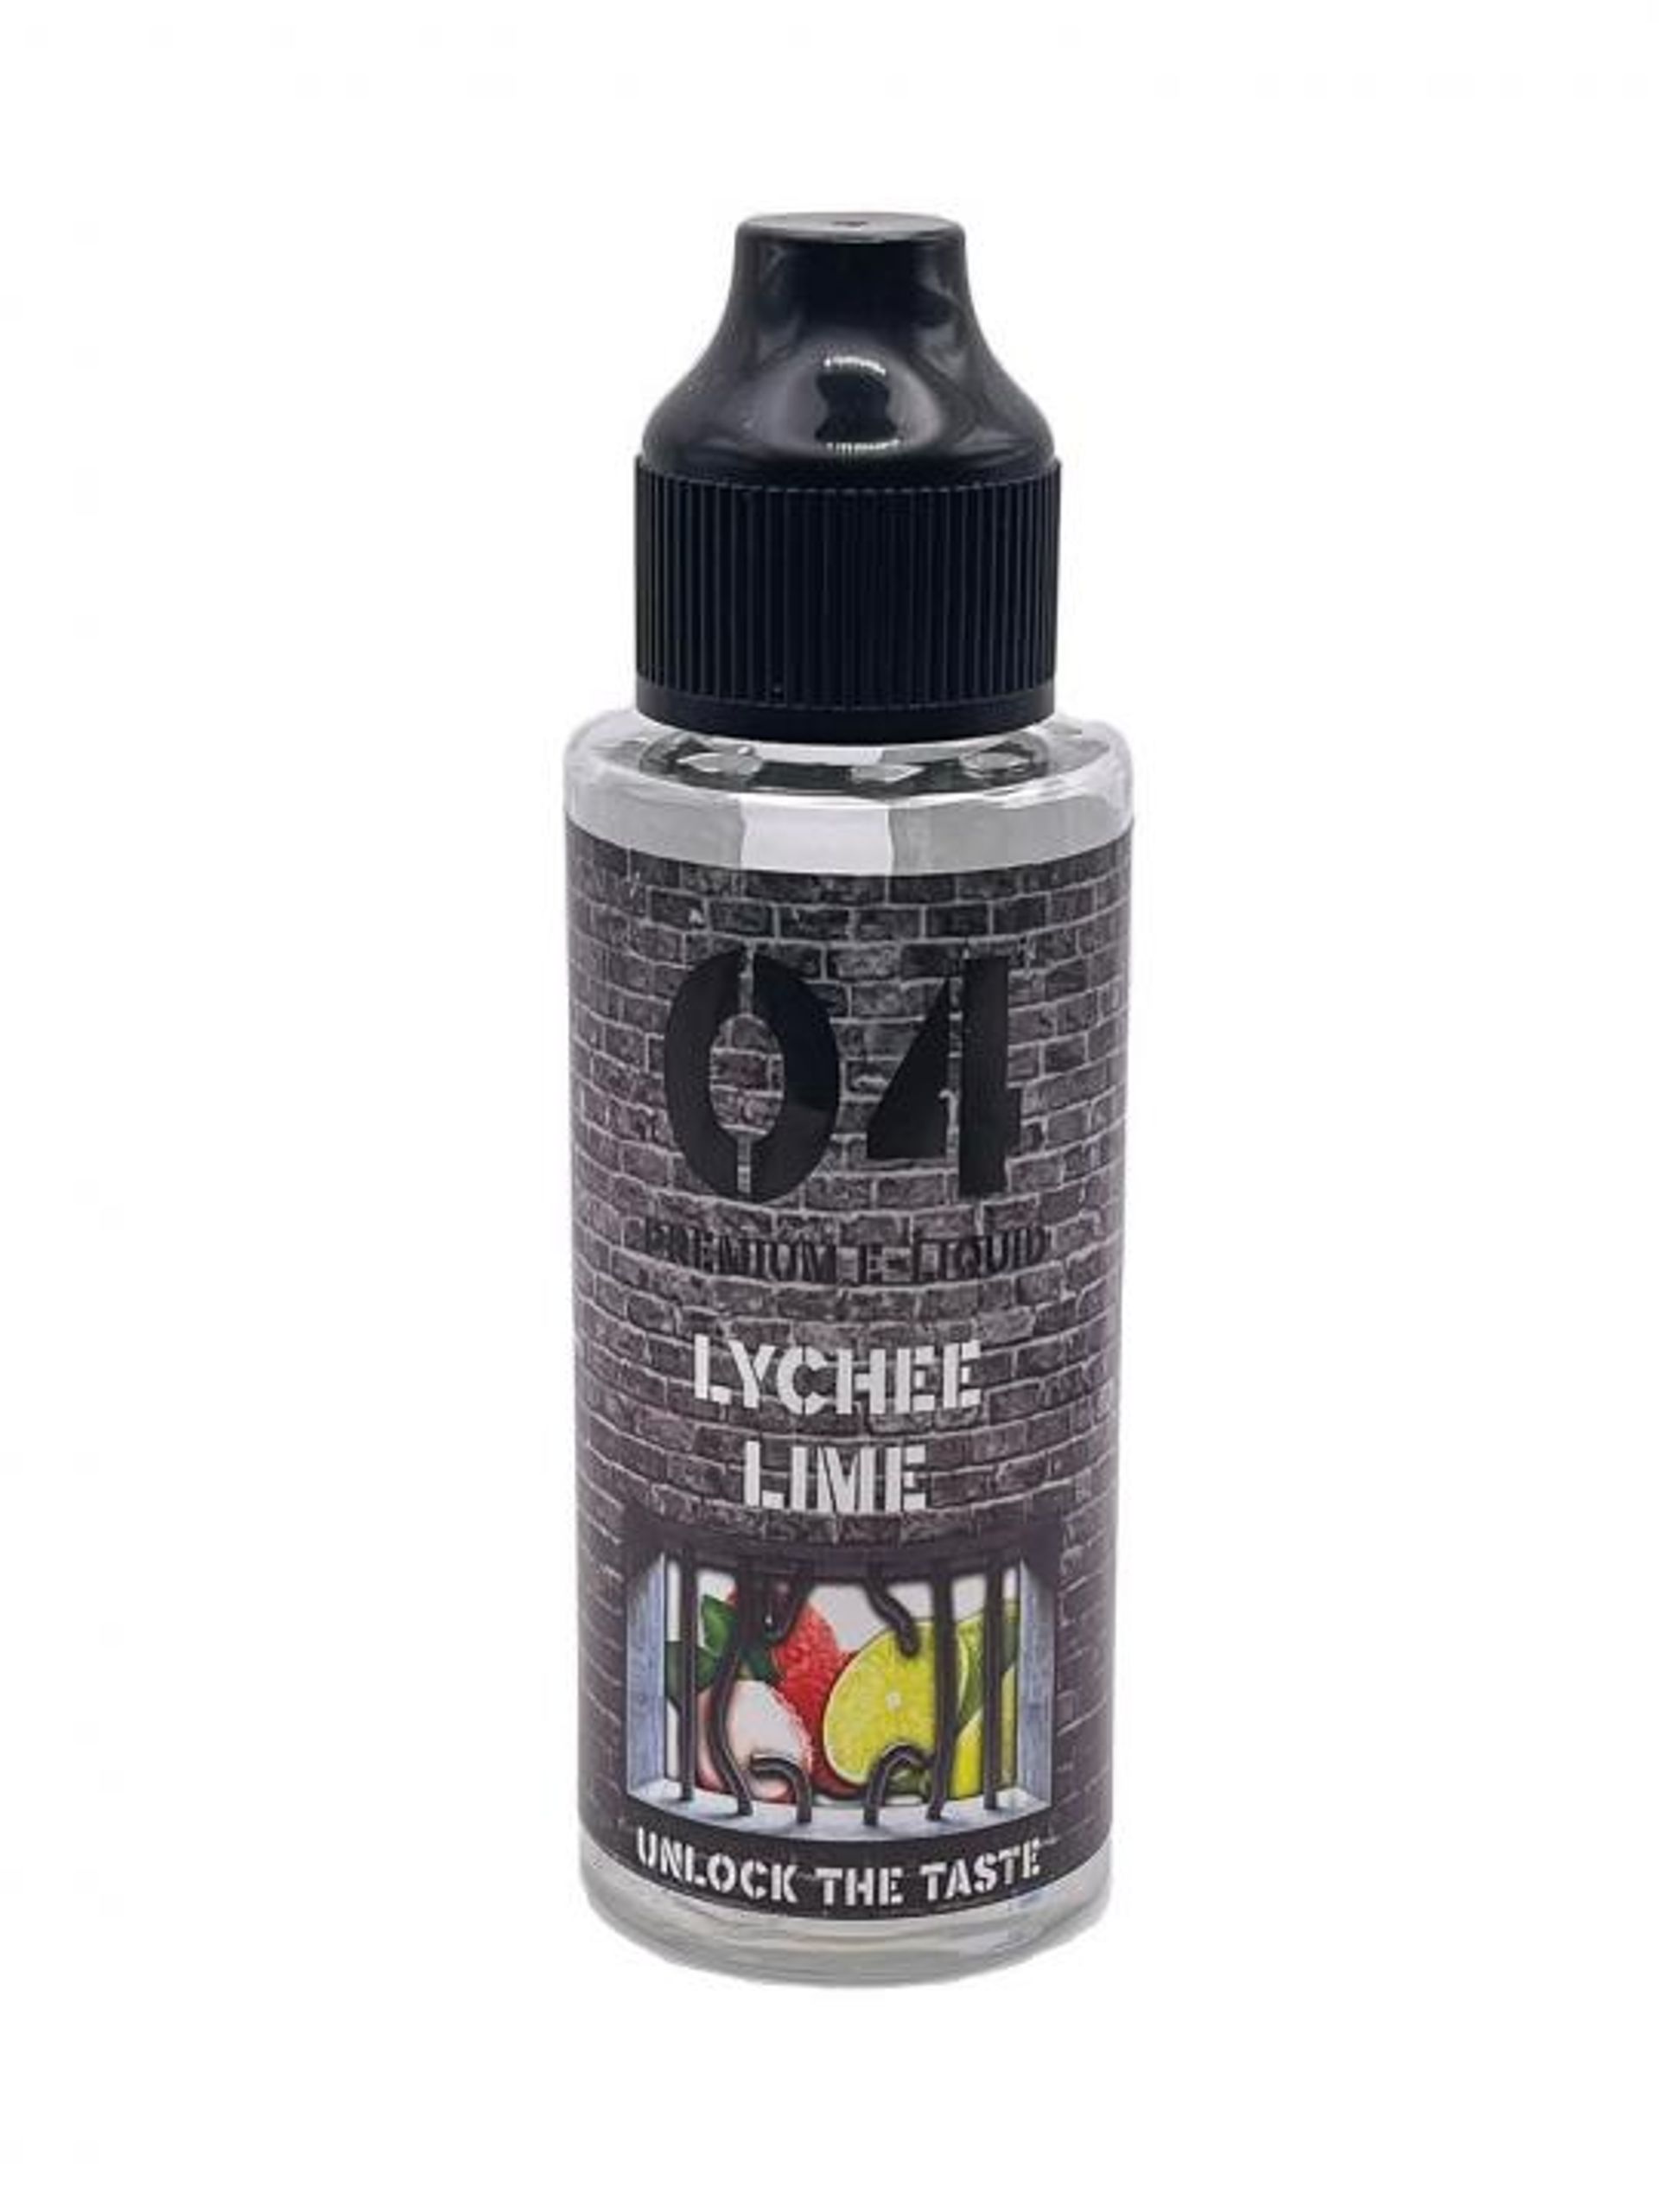 Image of Lychee Lime by 04 Liquids